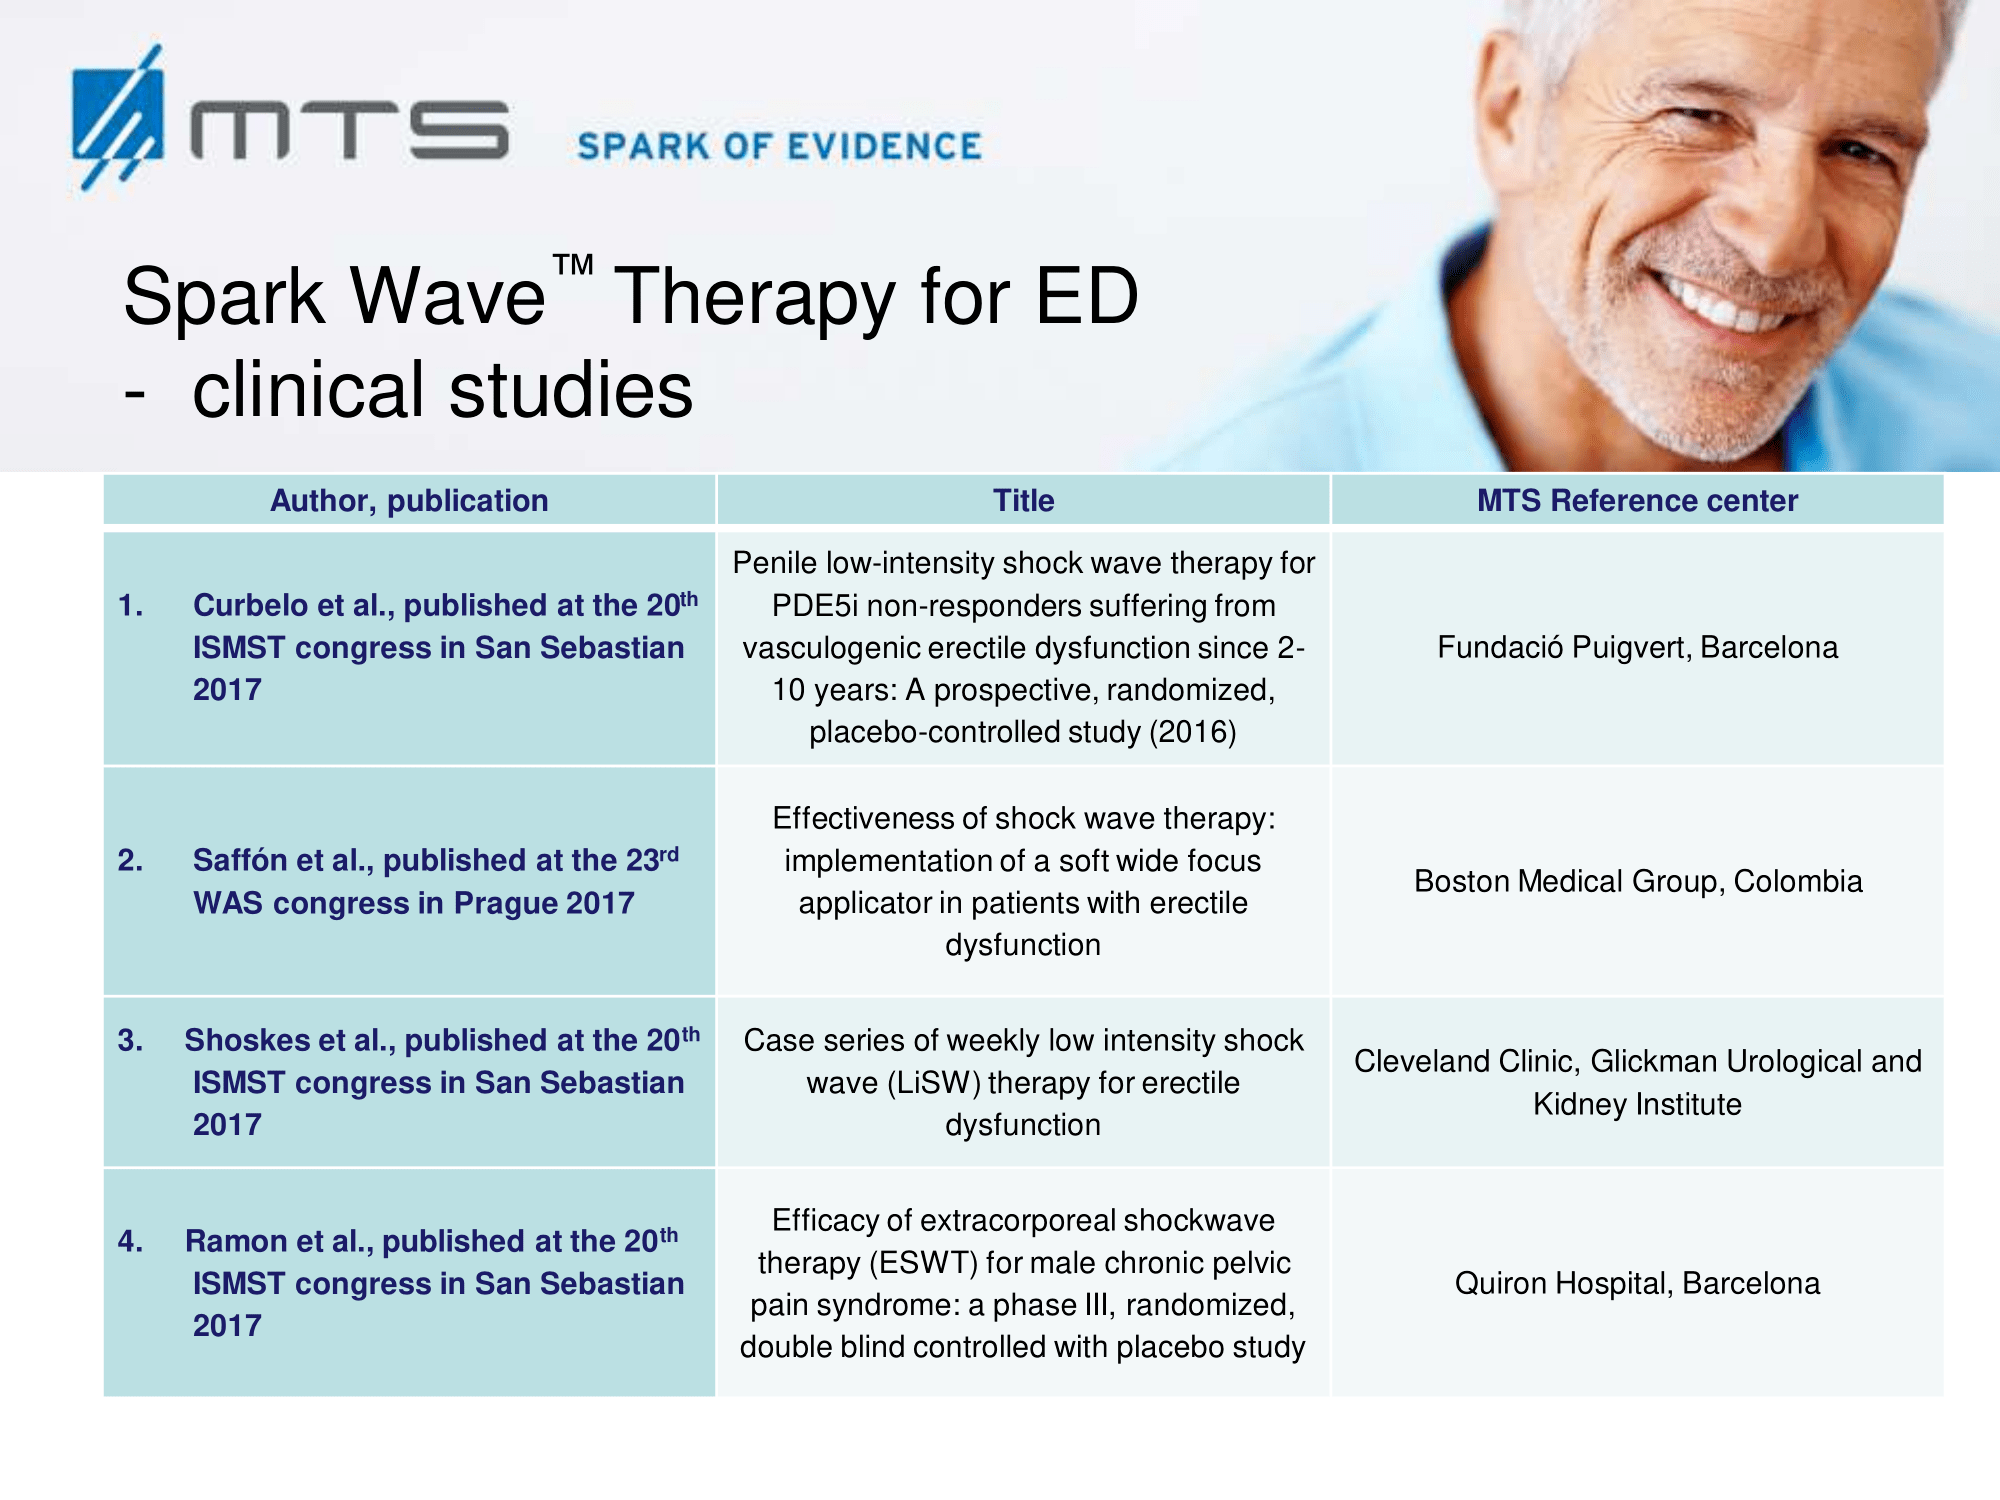 Extracorporeal Shockwave Treatment for Erectile Dysfunction